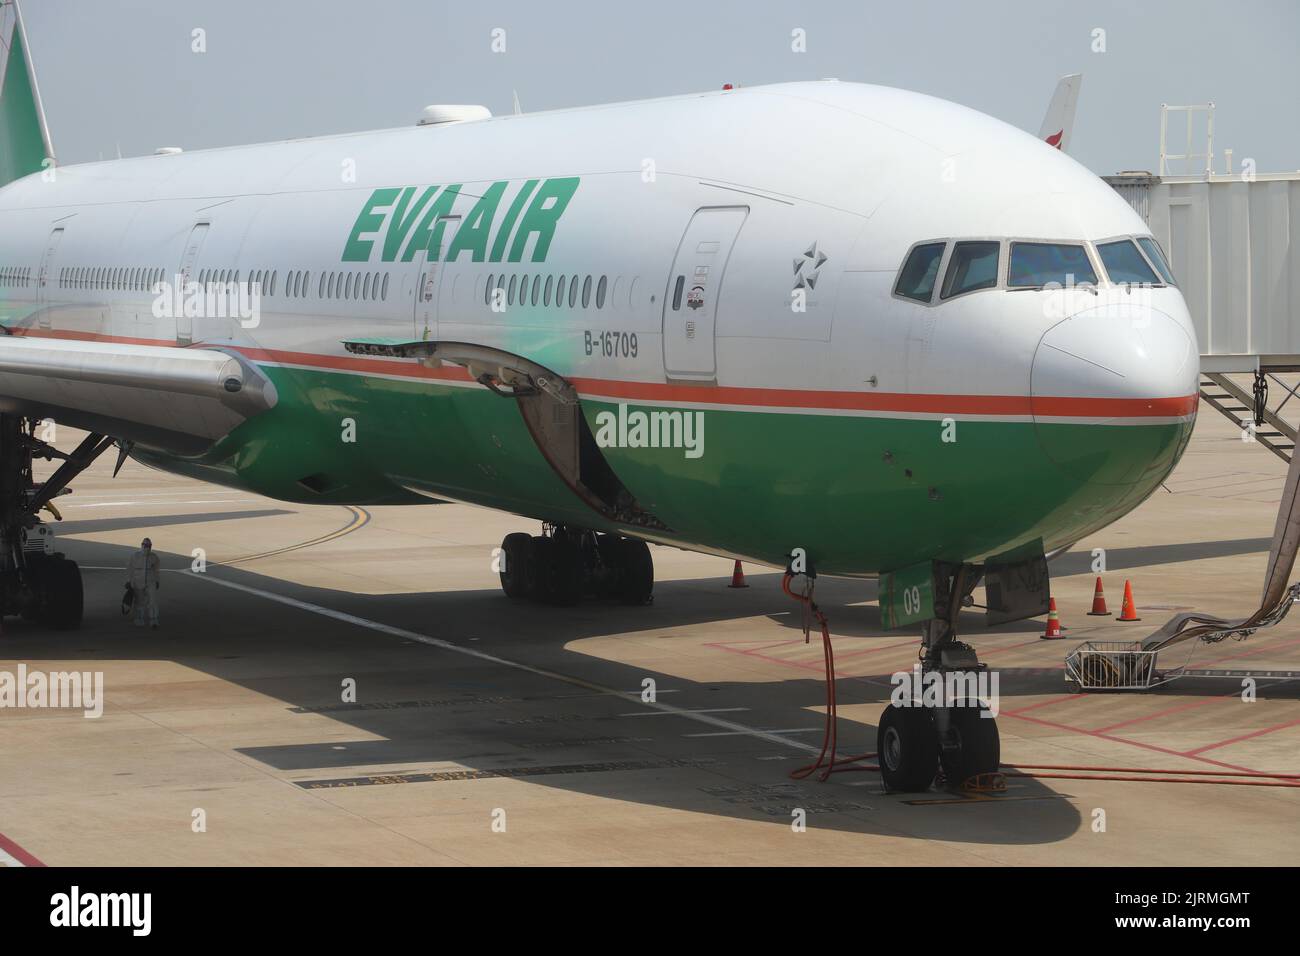 The white, green and red EVA Air Boeing B777-300ER at Shanghai Pudong Airport Stock Photo